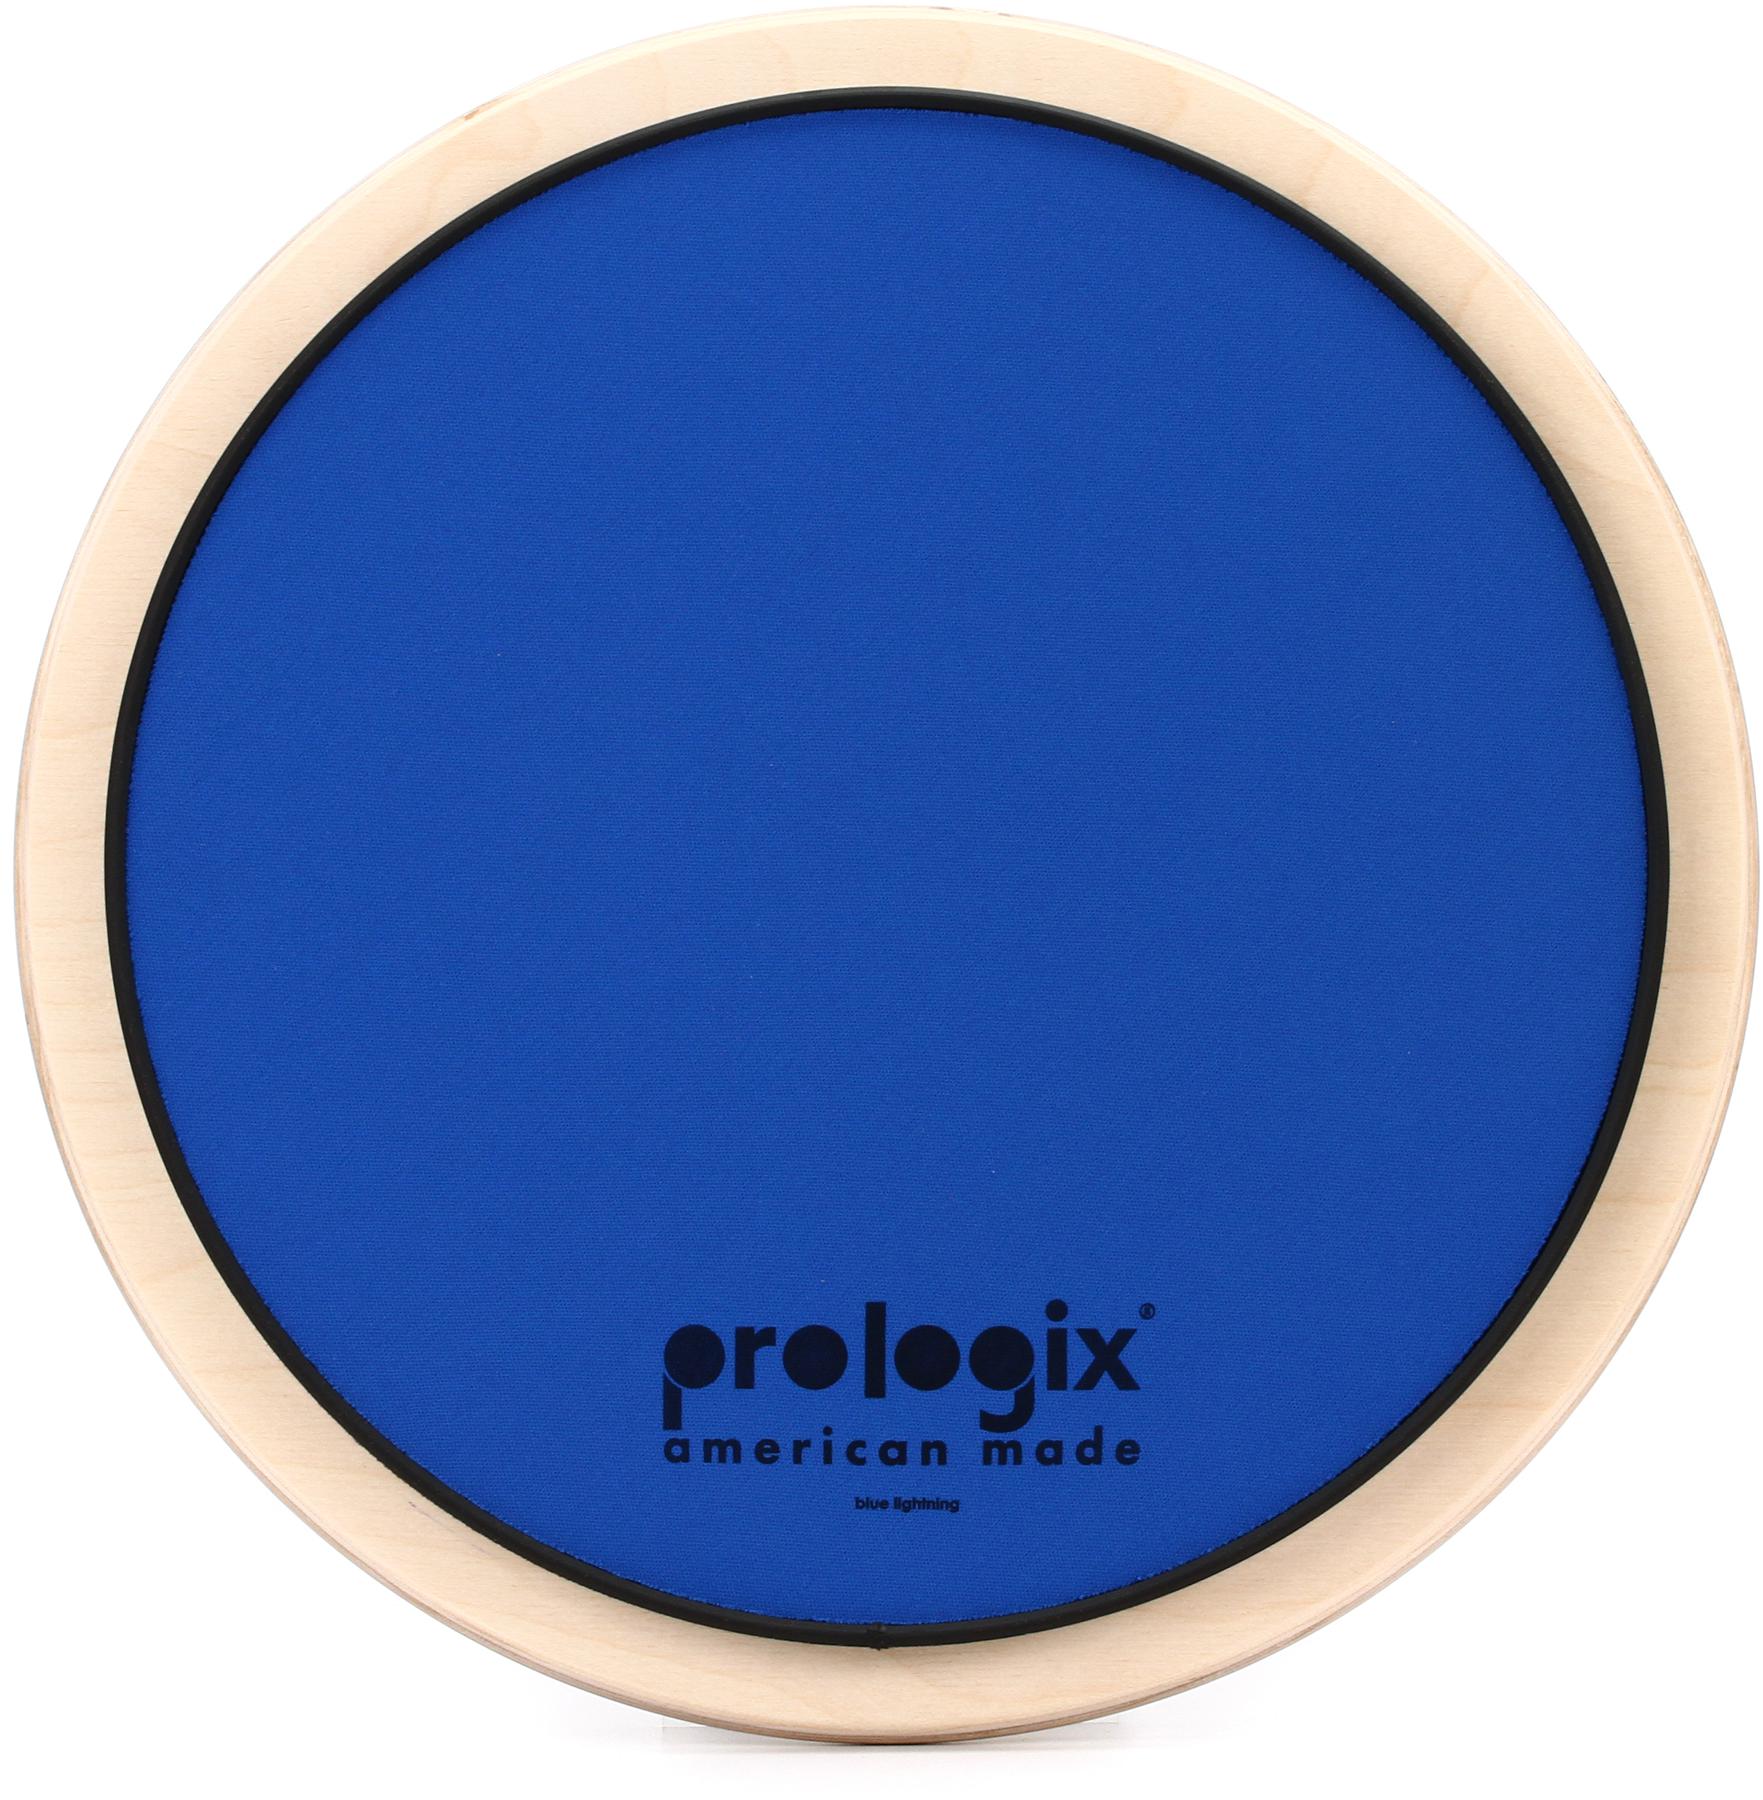 Prologix Percussion Blue Lightning Practice Pad 12-inch - VST Heavy Resistance